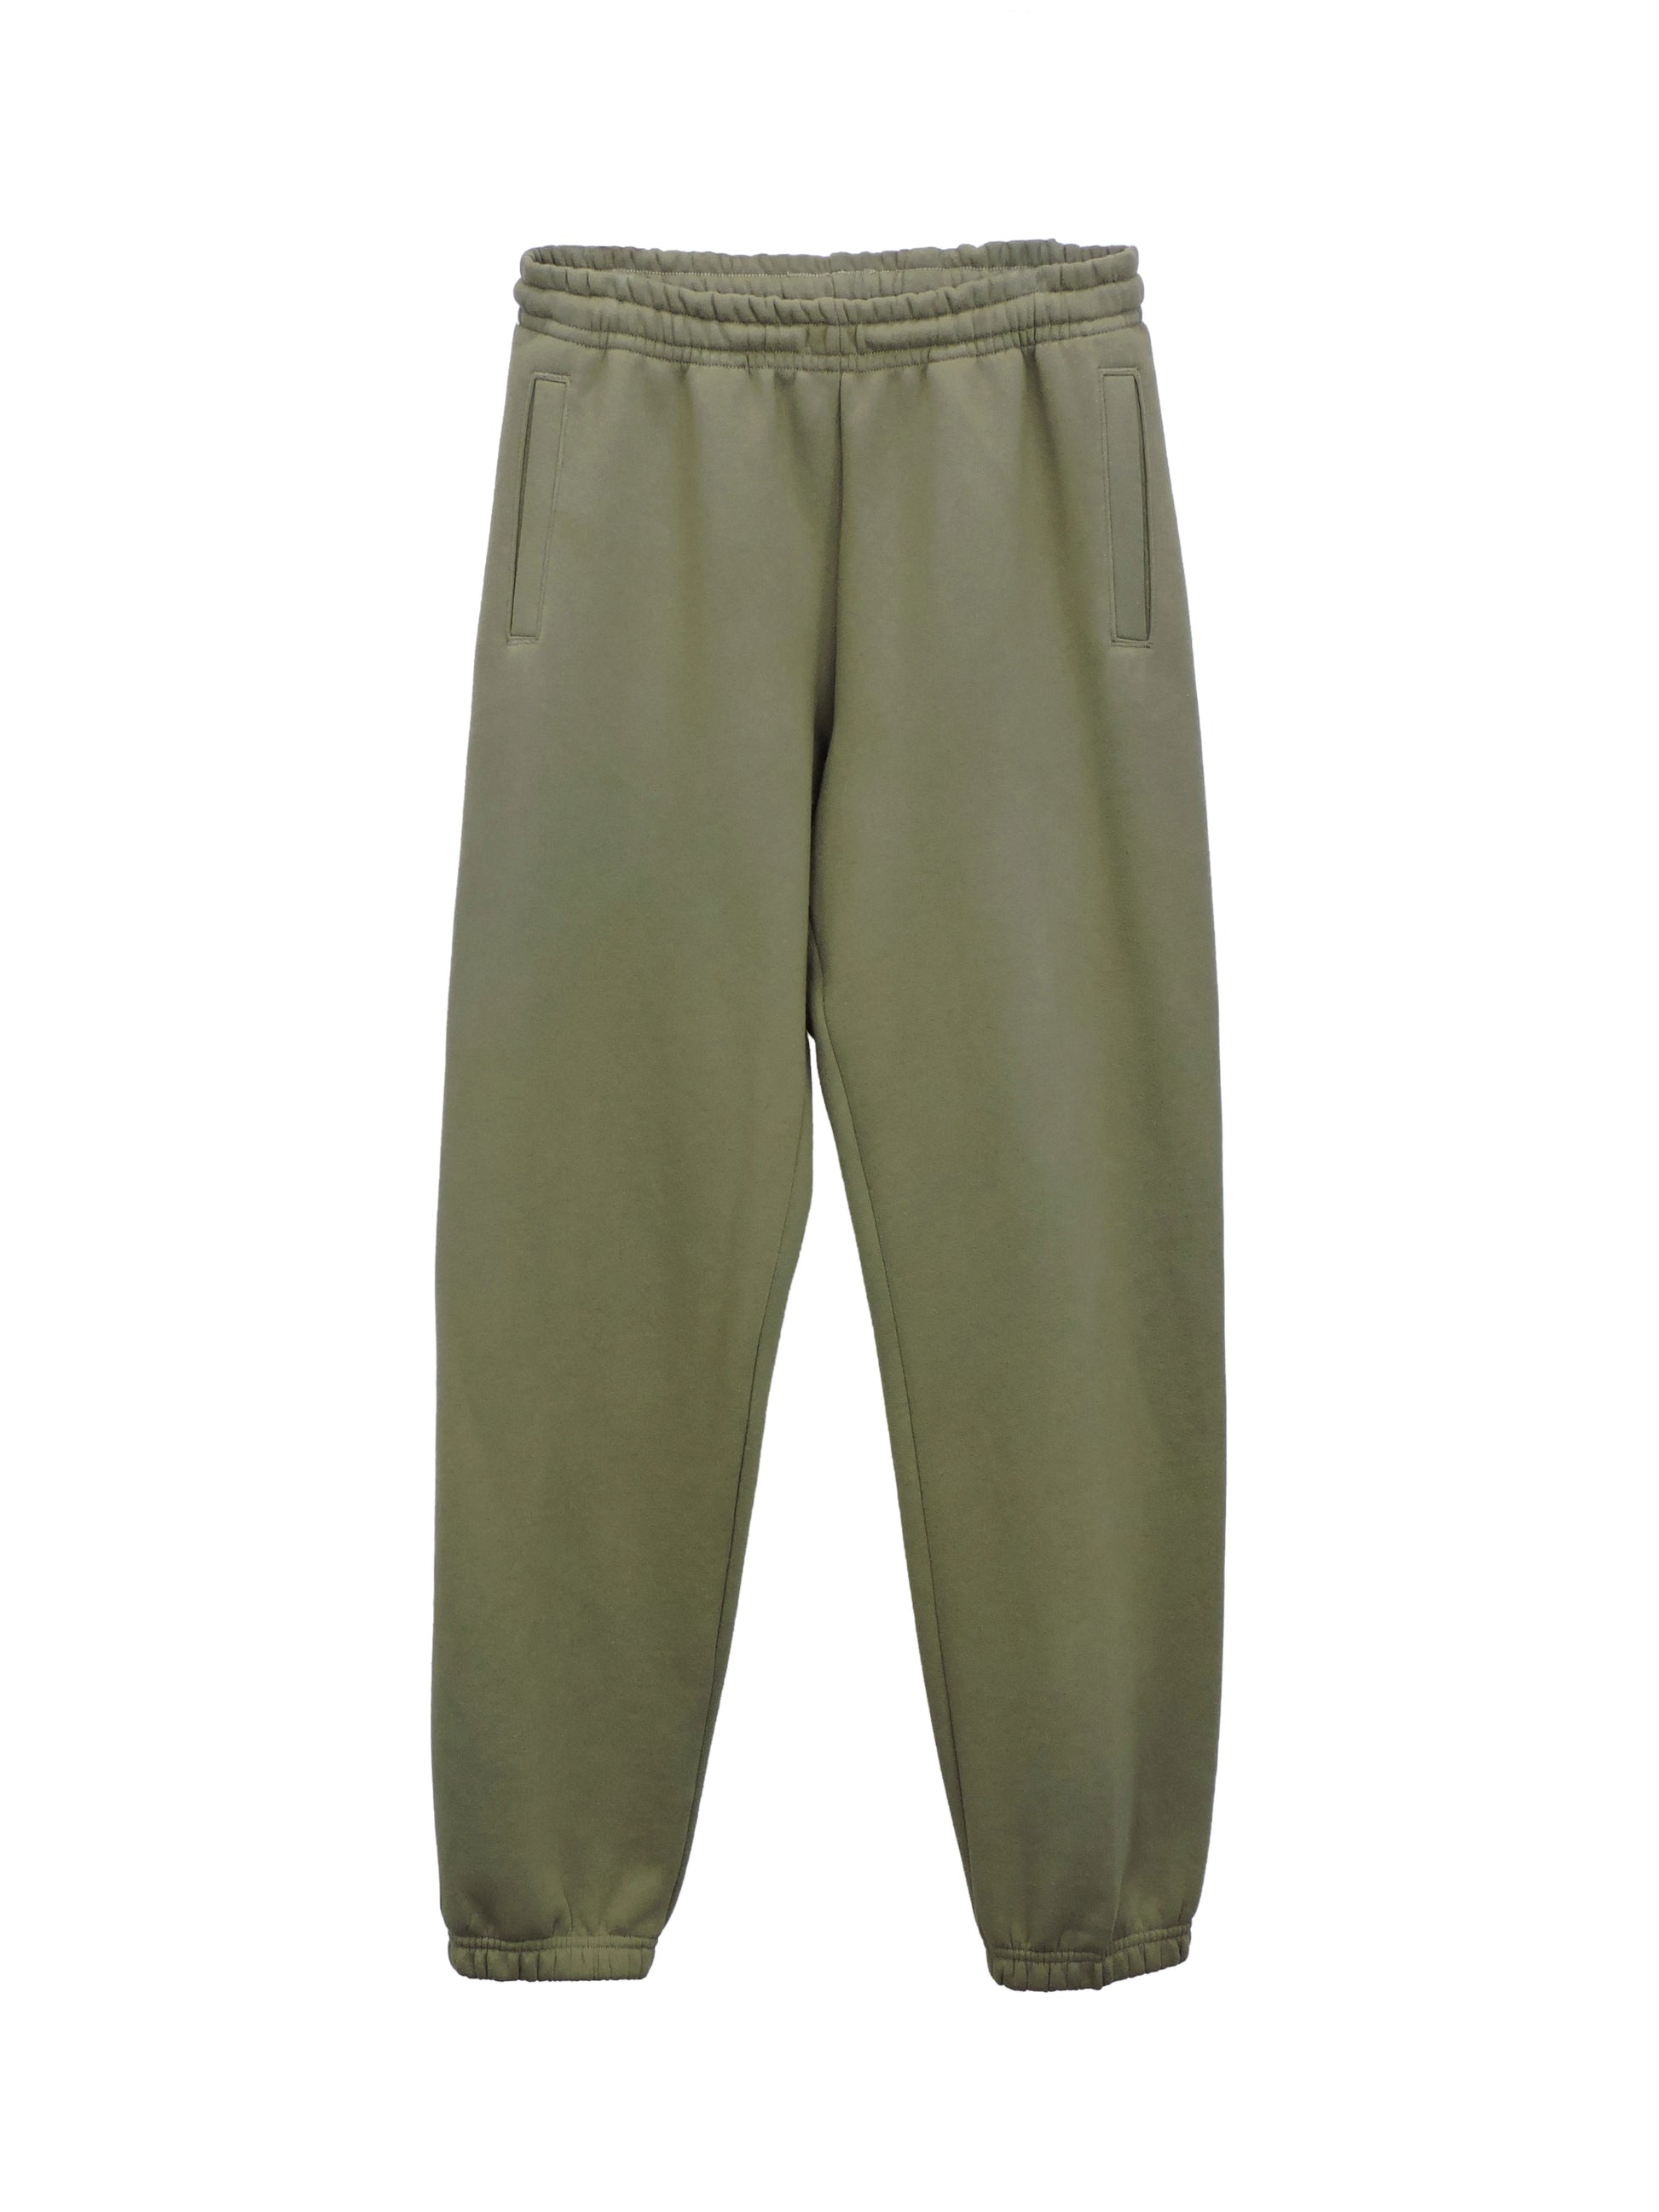 Art Sweatpants - Moss Green French Terry